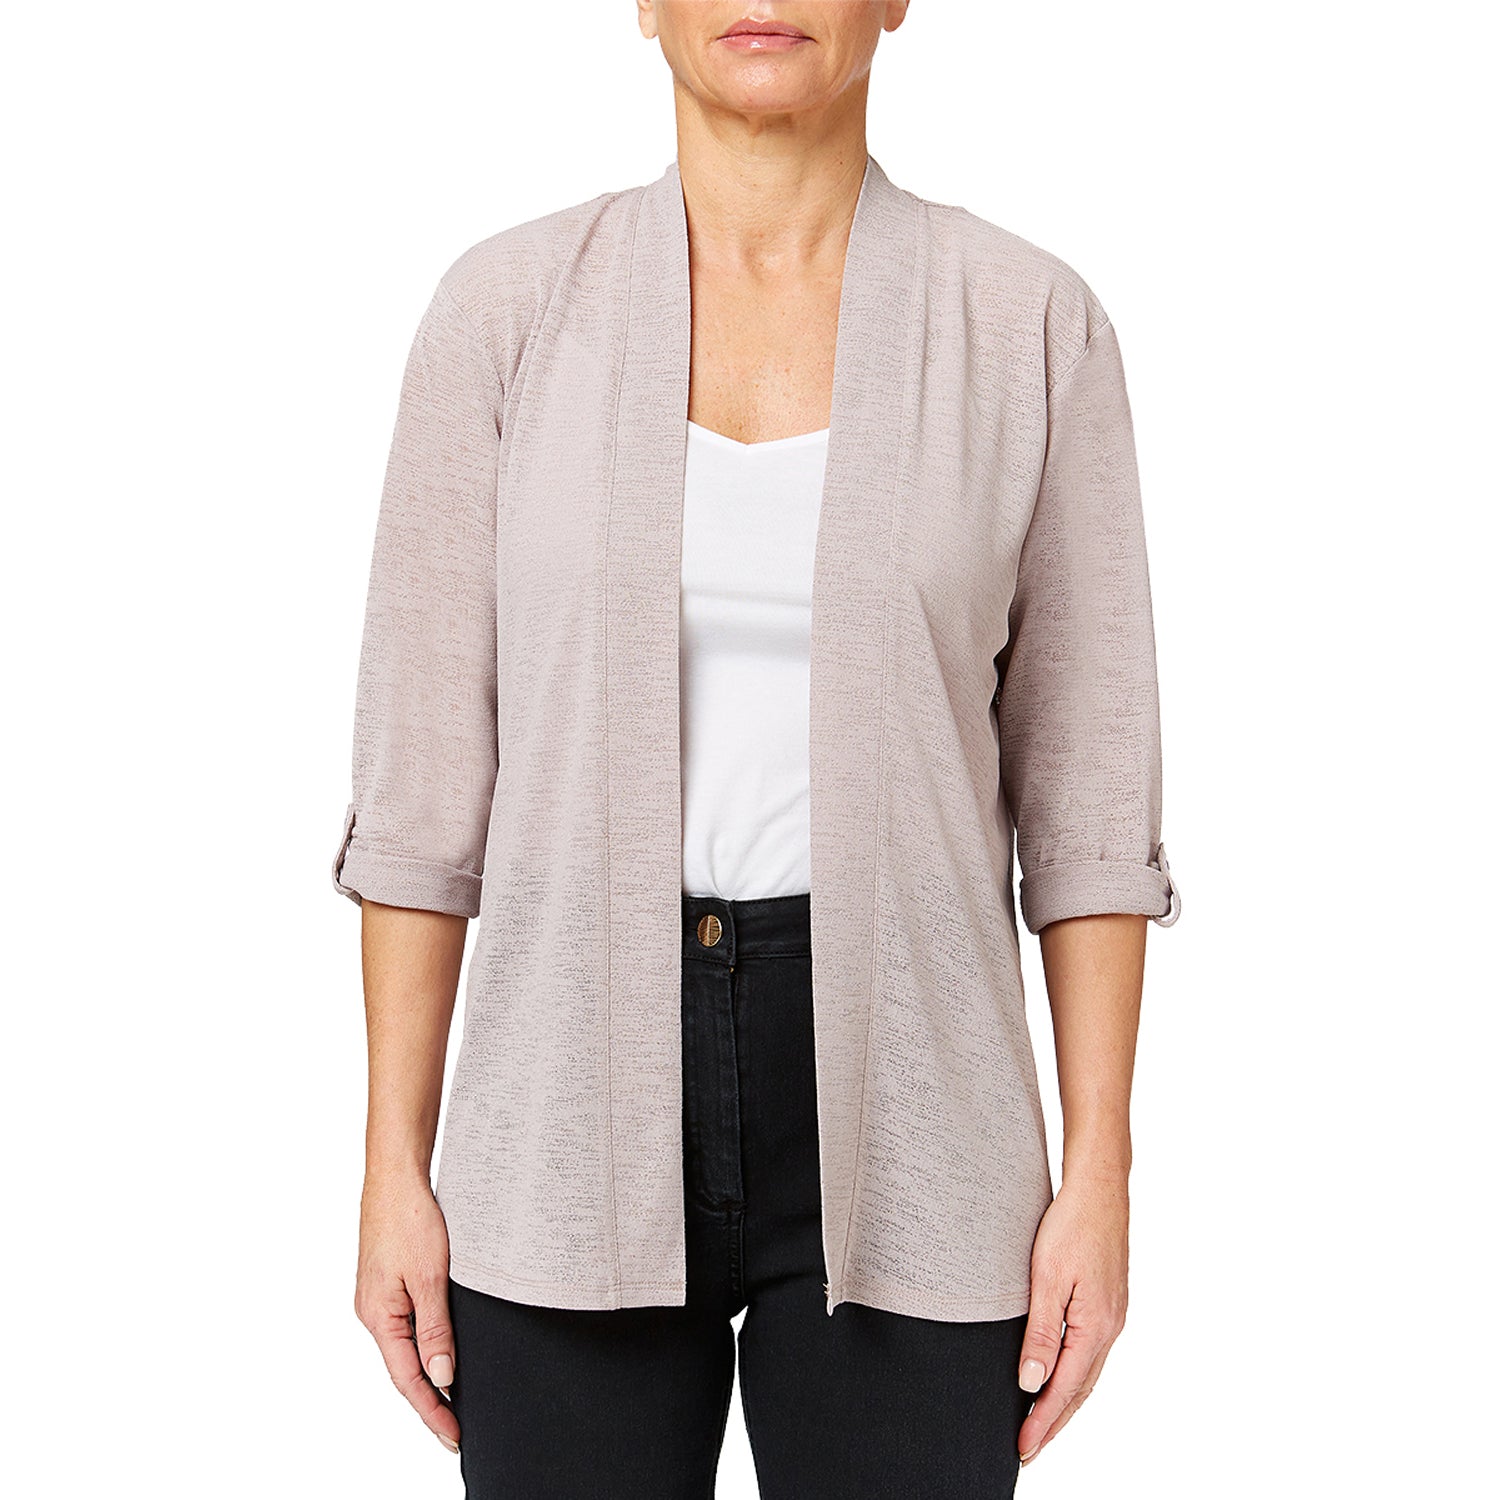 Penny Plain Roll Up Sleeve Cardigan - Cloud 2 Shaws Department Stores